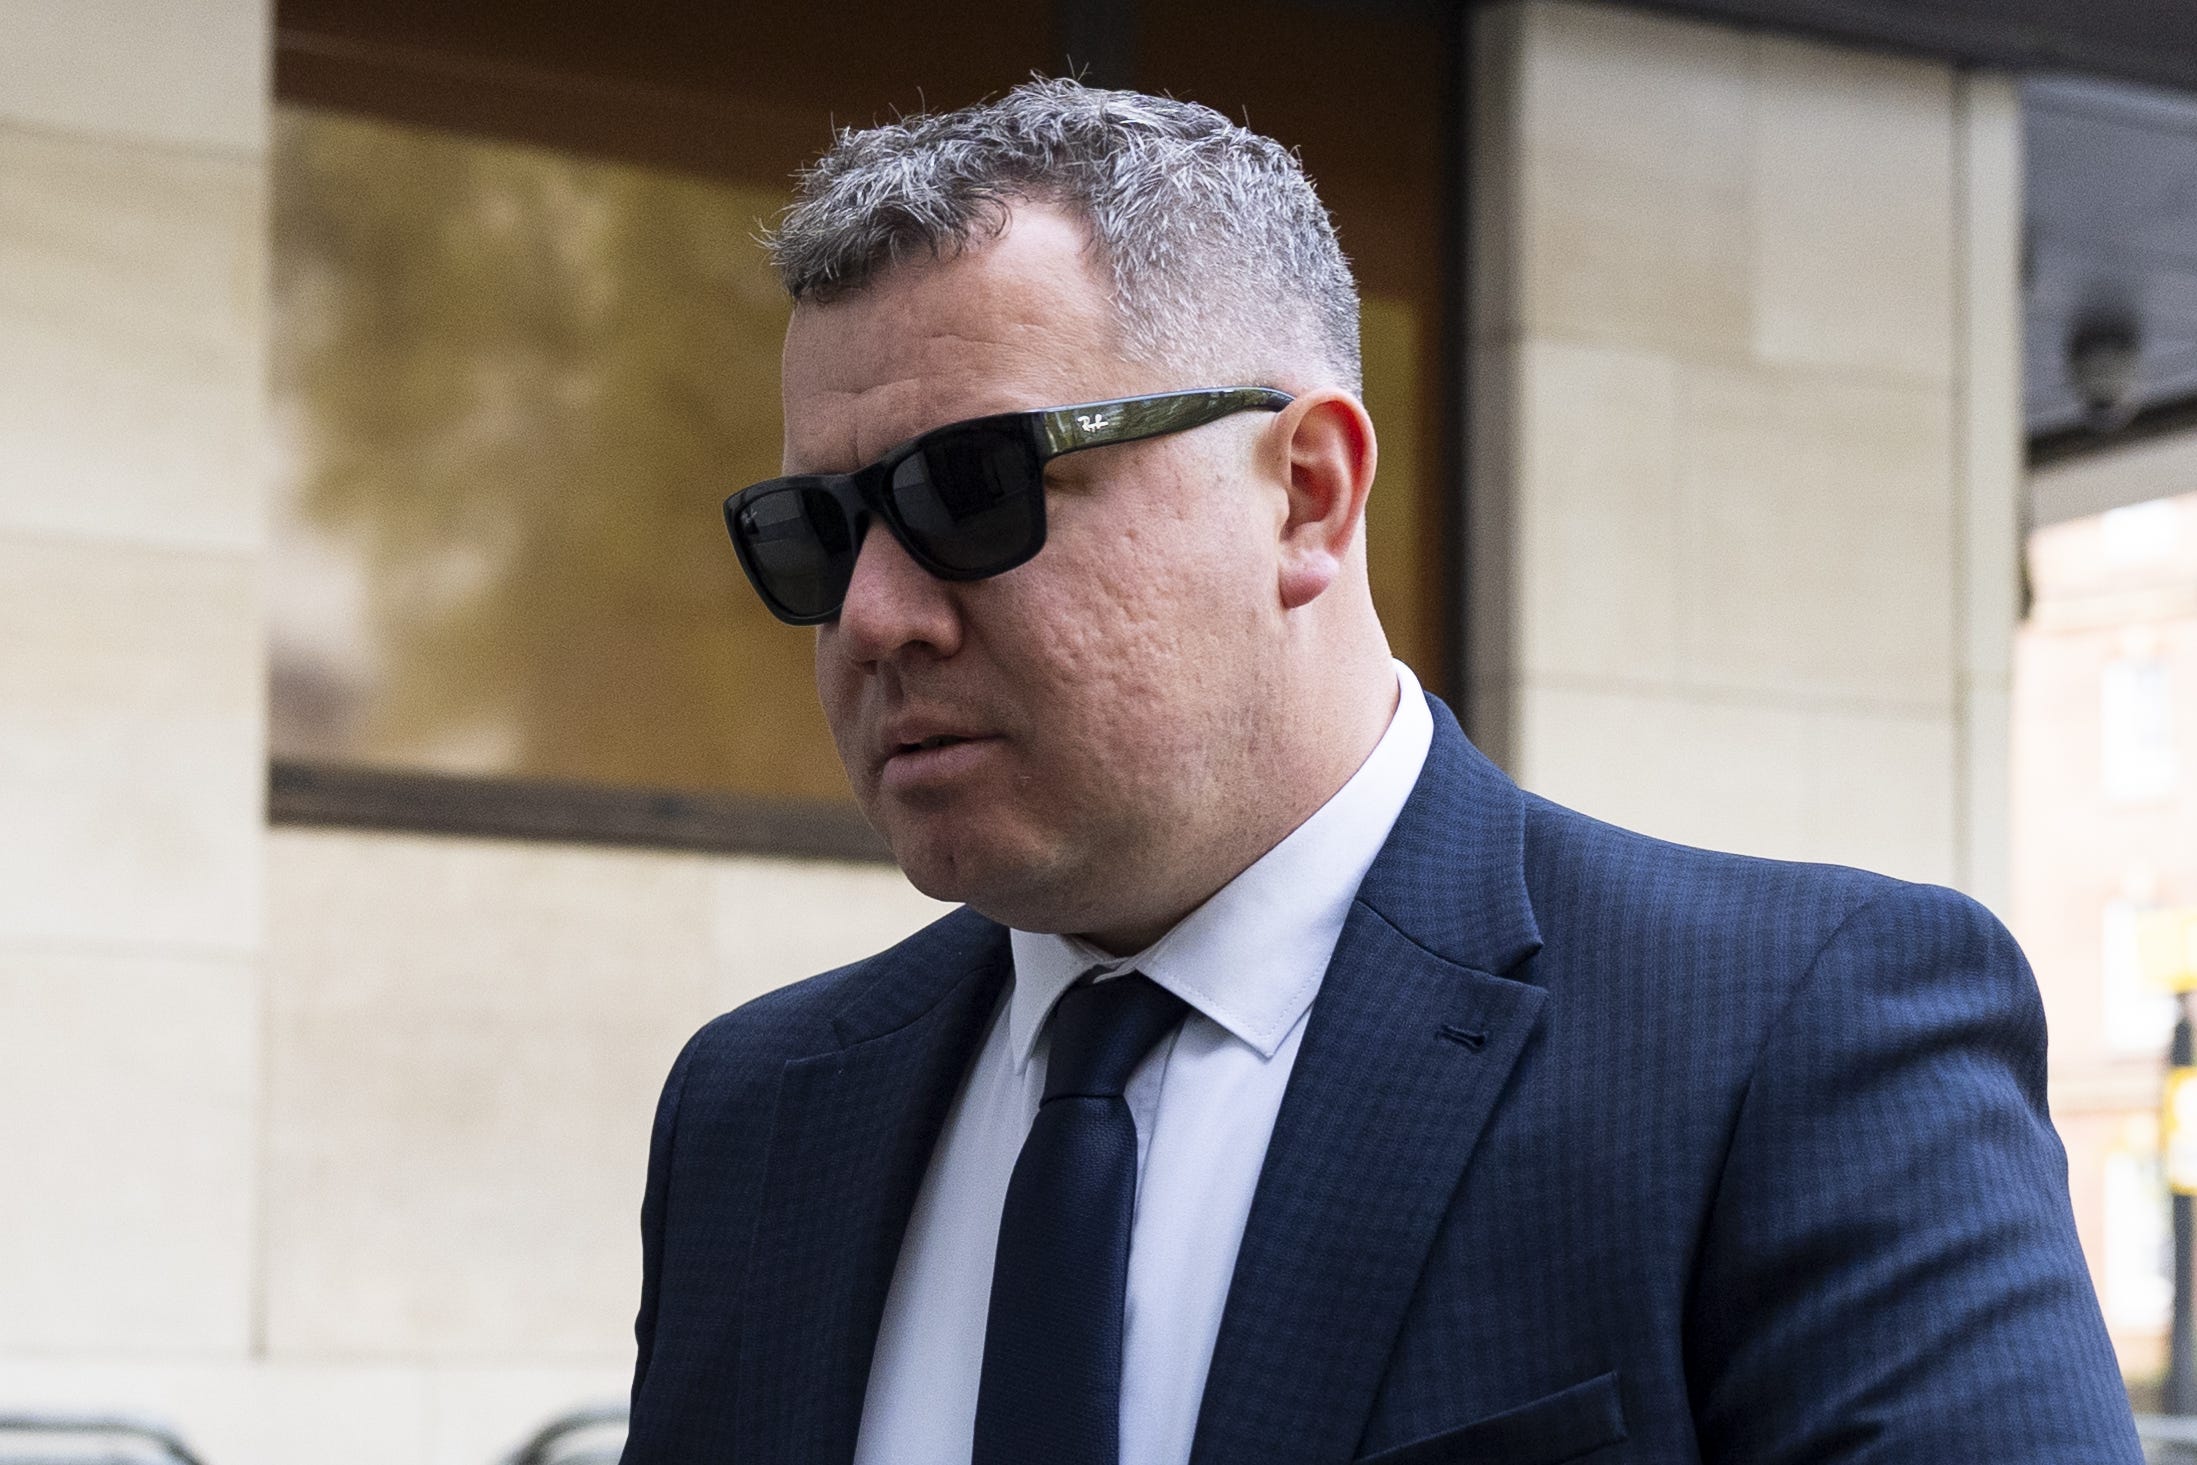 Metropolitan Police officer Jonathan Marsh, arrives at Westminster Magistrates’ Court, central London, for sentencing after he was found guilty of common assault for punching a medical worker in November 2022 after mistaking him for a suspect. Picture date: Monday April 29, 2024.